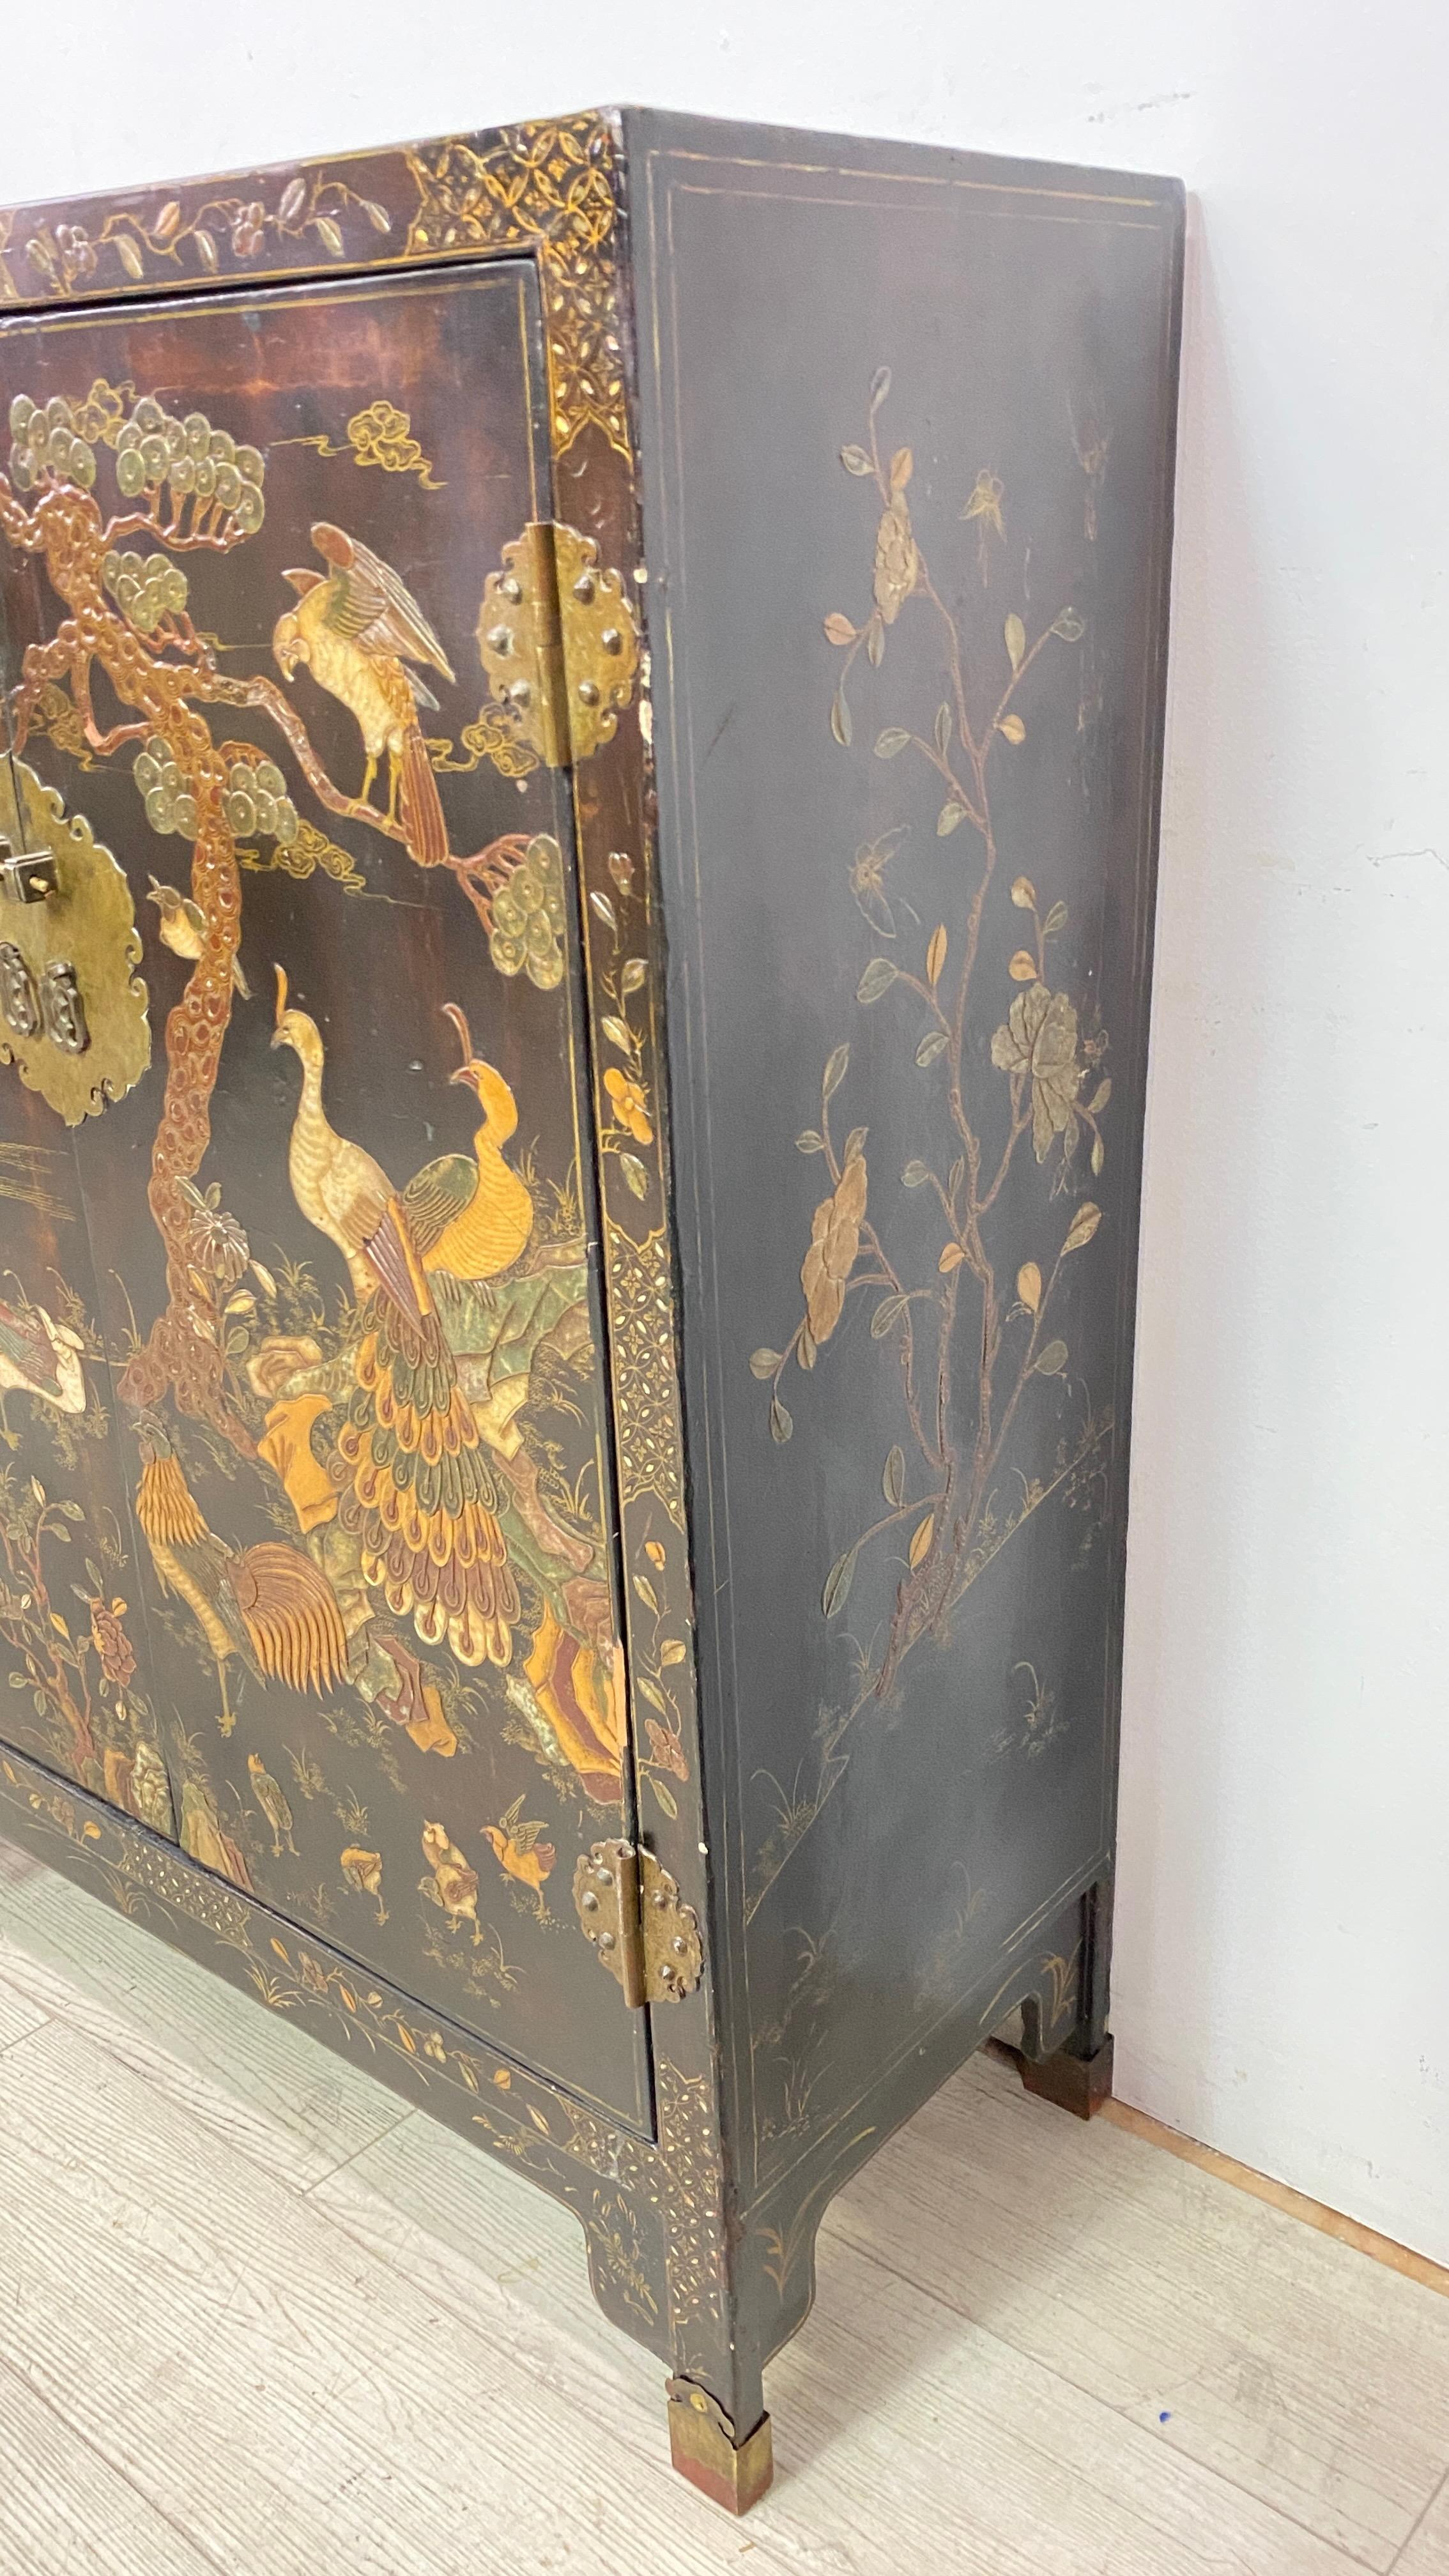  Pair of Chinese Laquer and Hardstone Cabinets, Late 19th - Early 20th Century For Sale 1